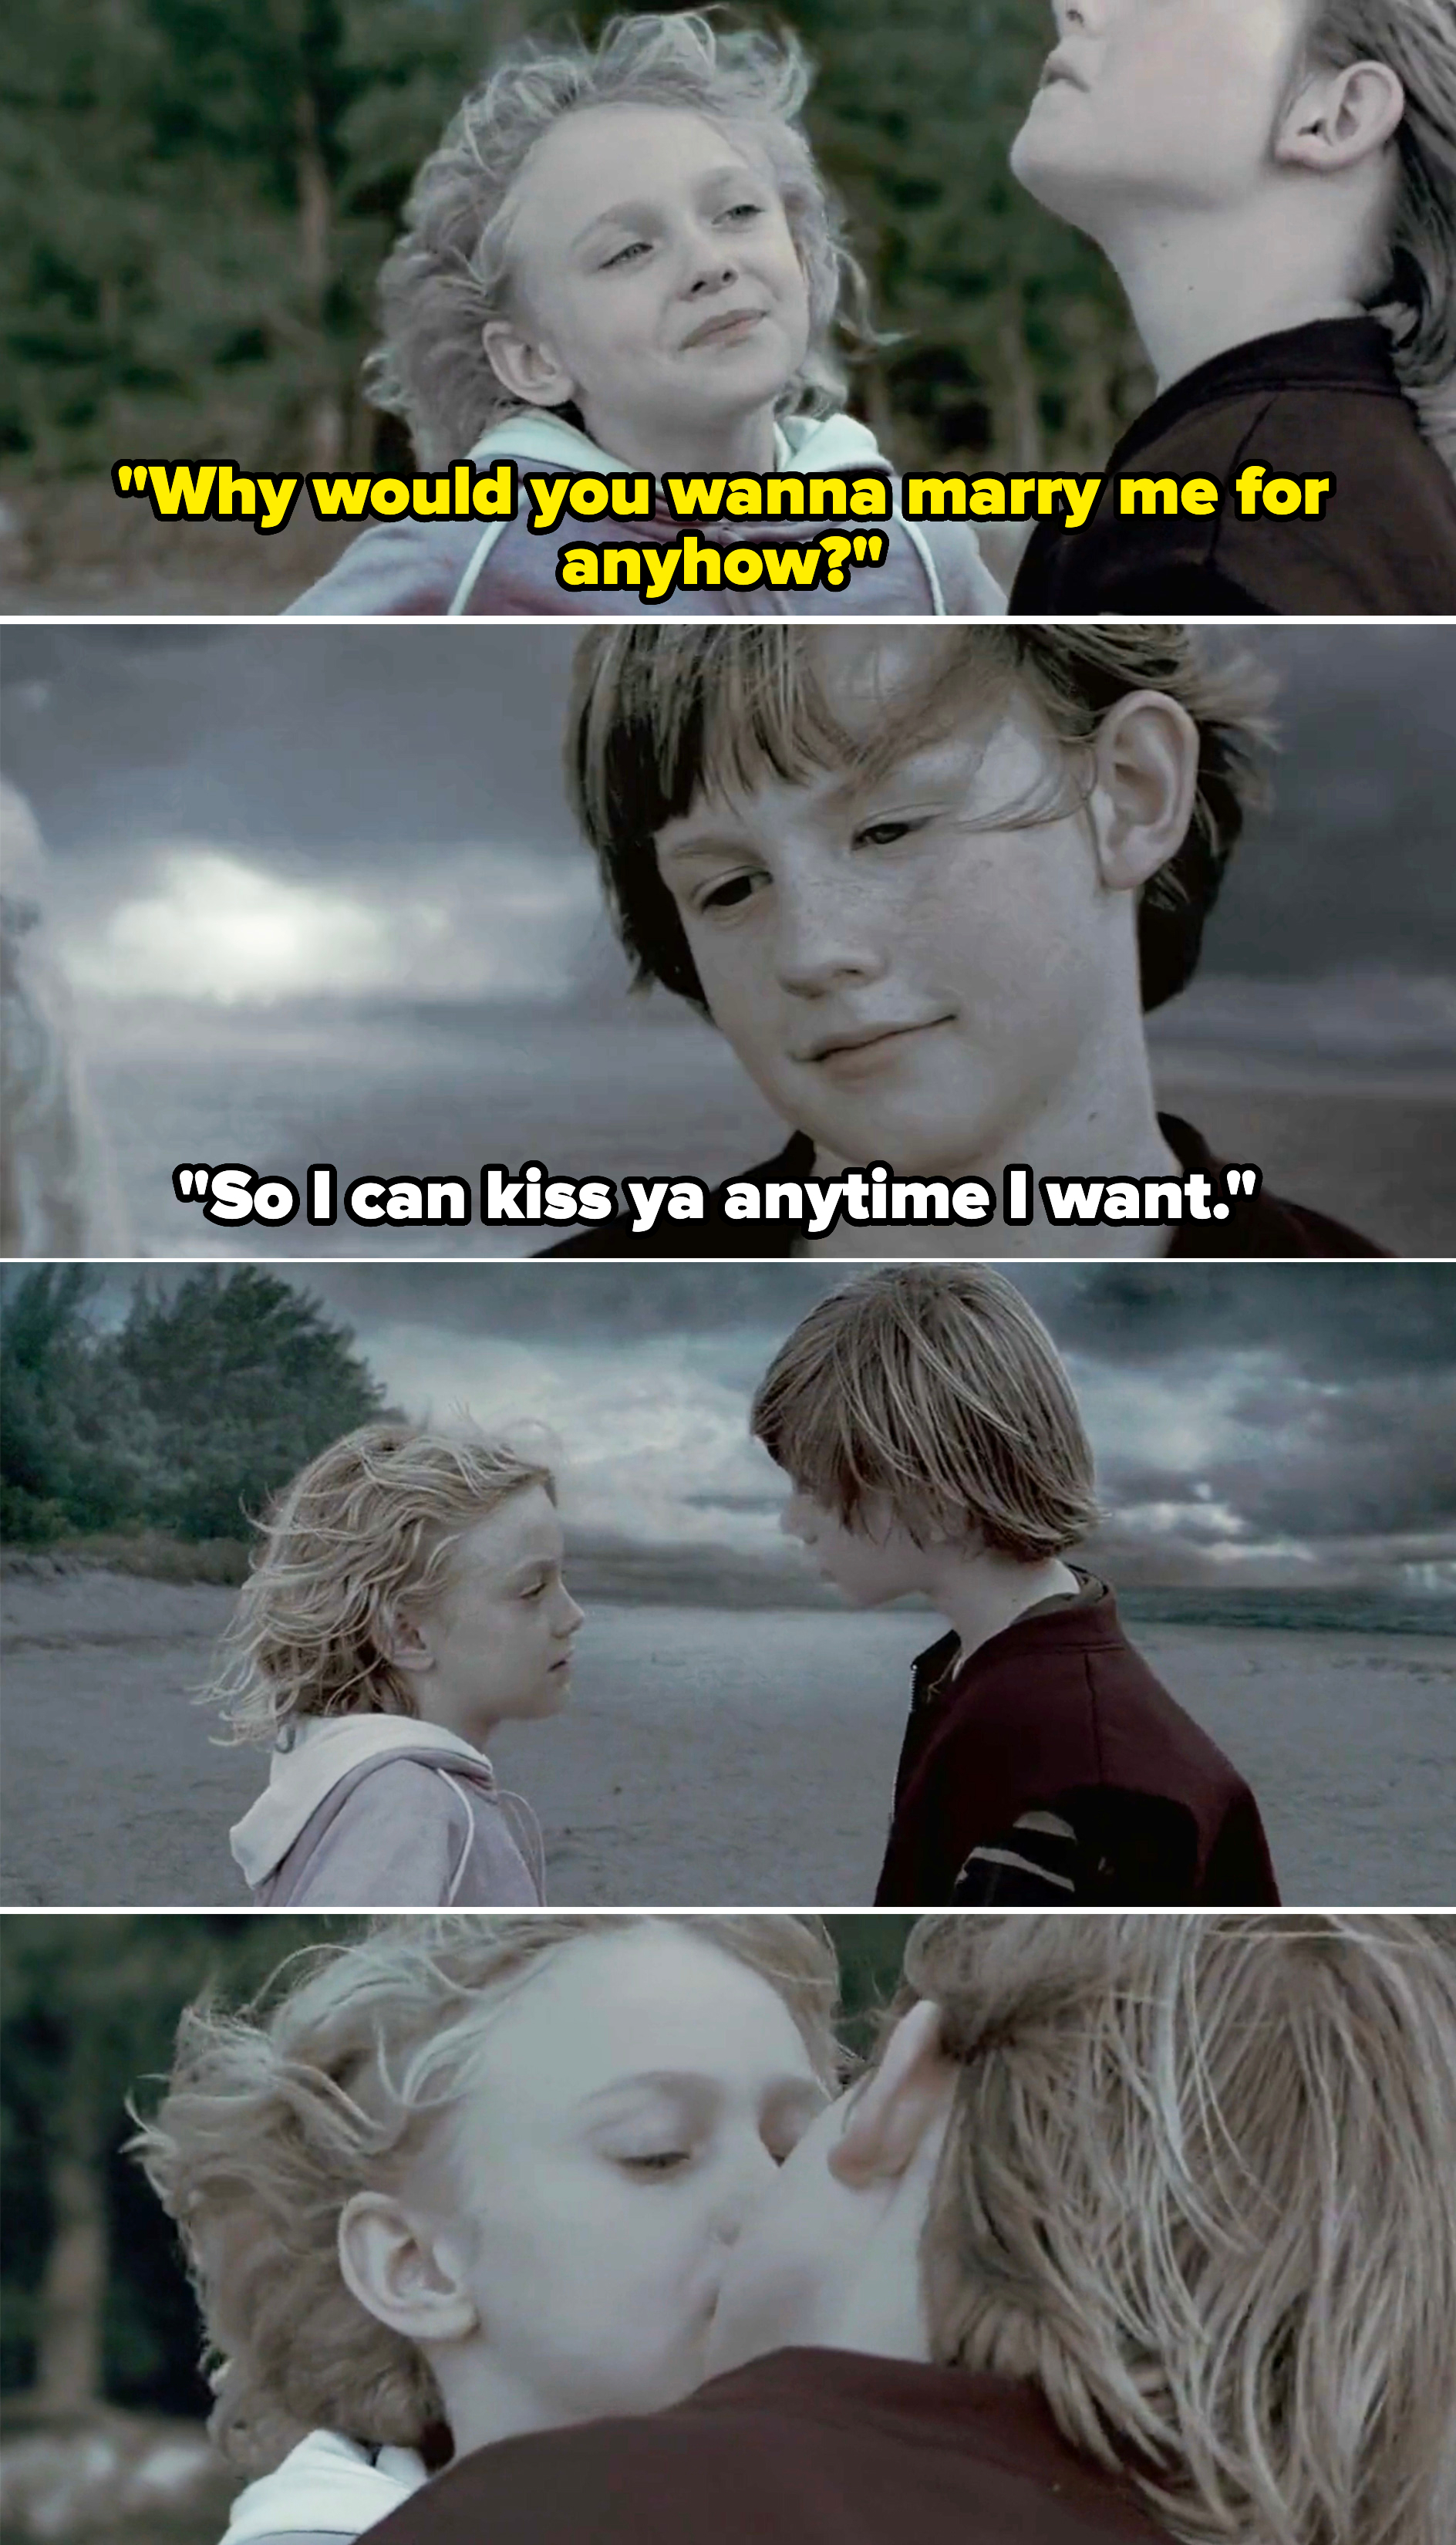 A young Jake kissing a young Melanie on a beach in Sweet Home Alabama